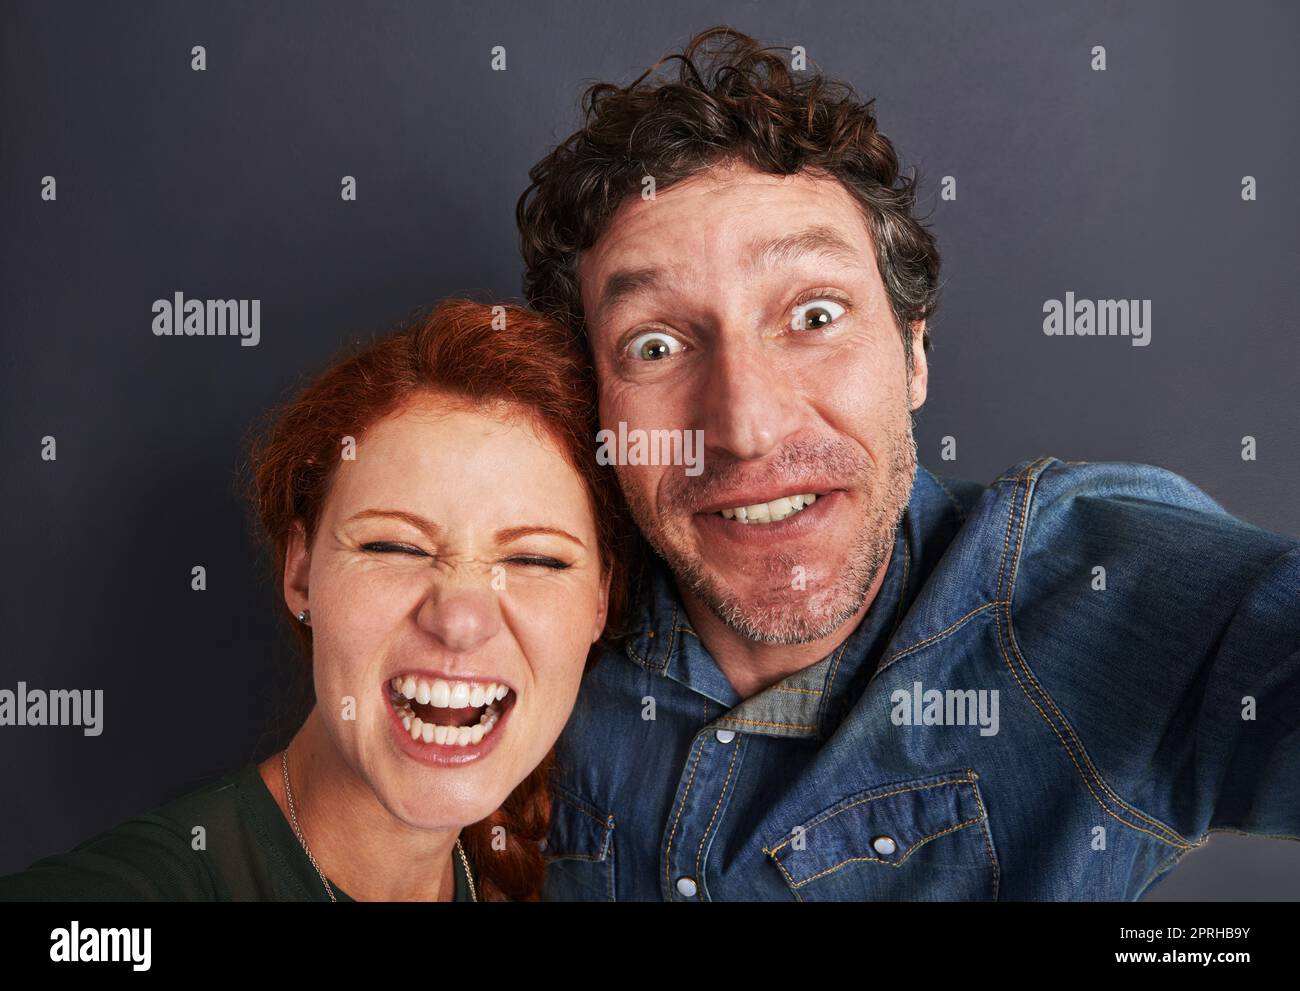 Winners of the couples silly face competition. Portrait of a happy young couple pulling silly faces for a selfie Stock Photo